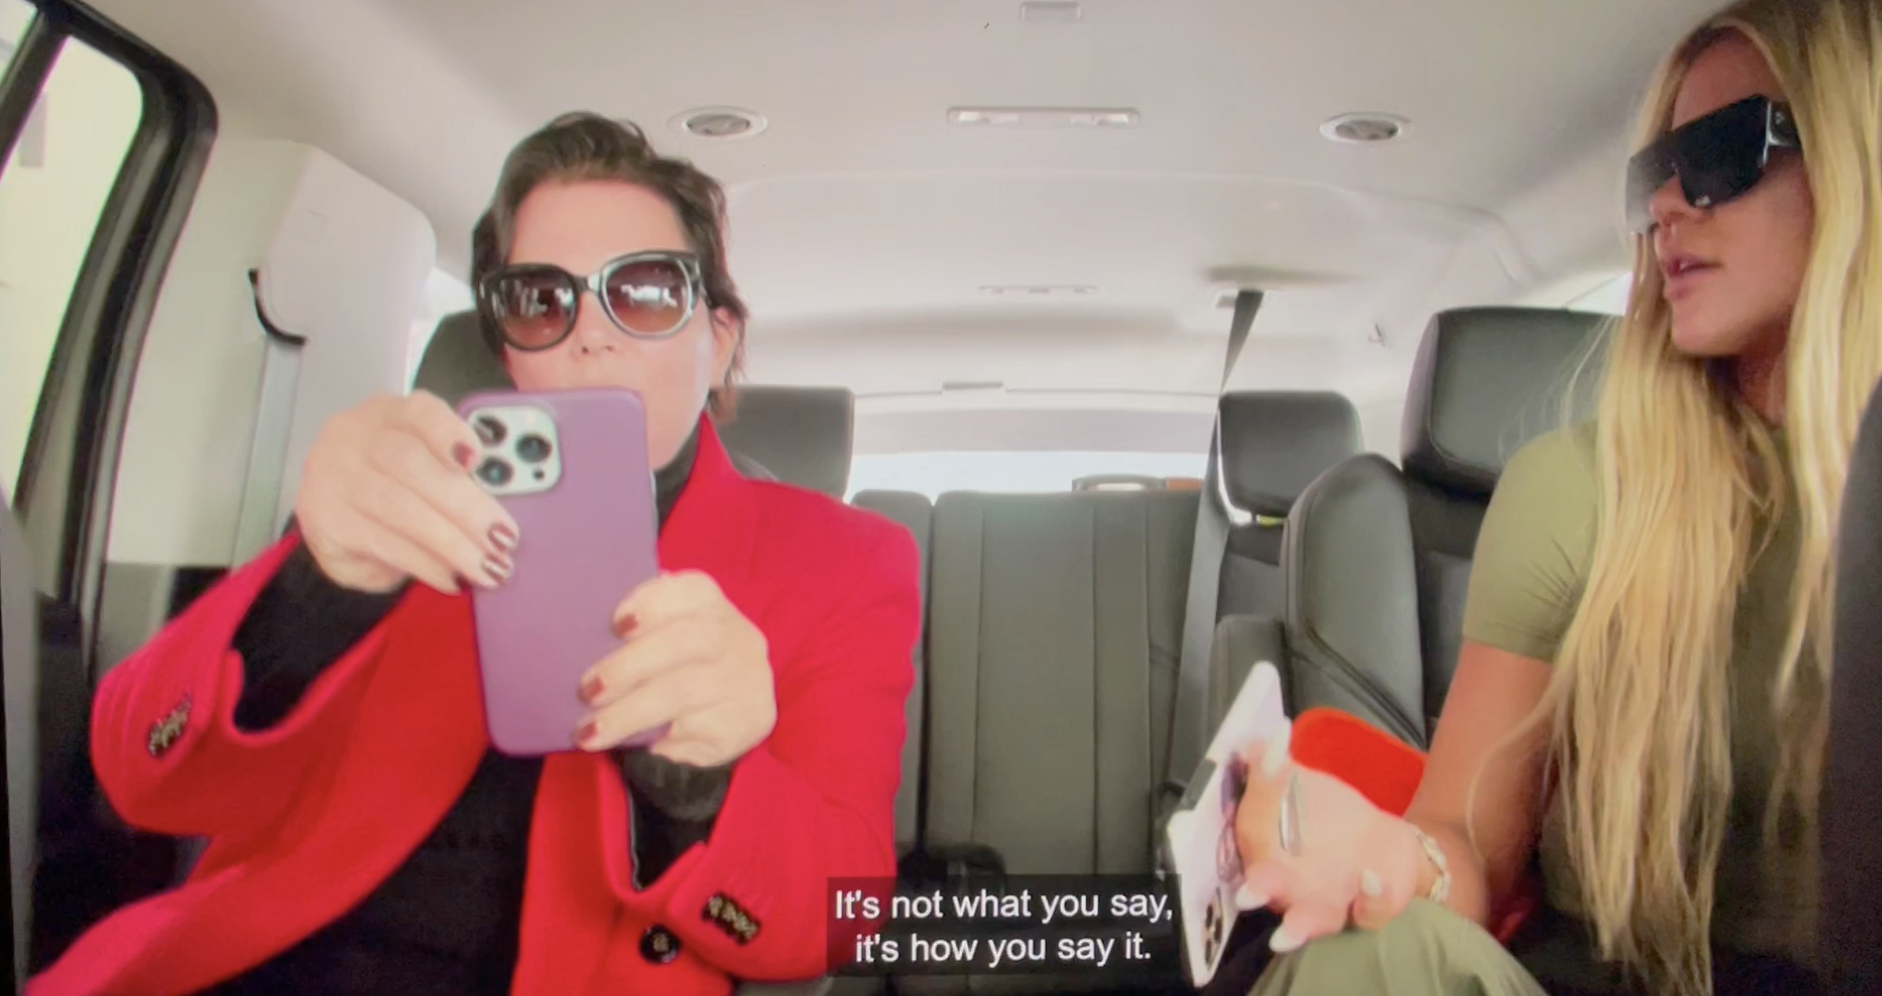 Kris Jenner and Khloe Kardashian in the backseat of a car.